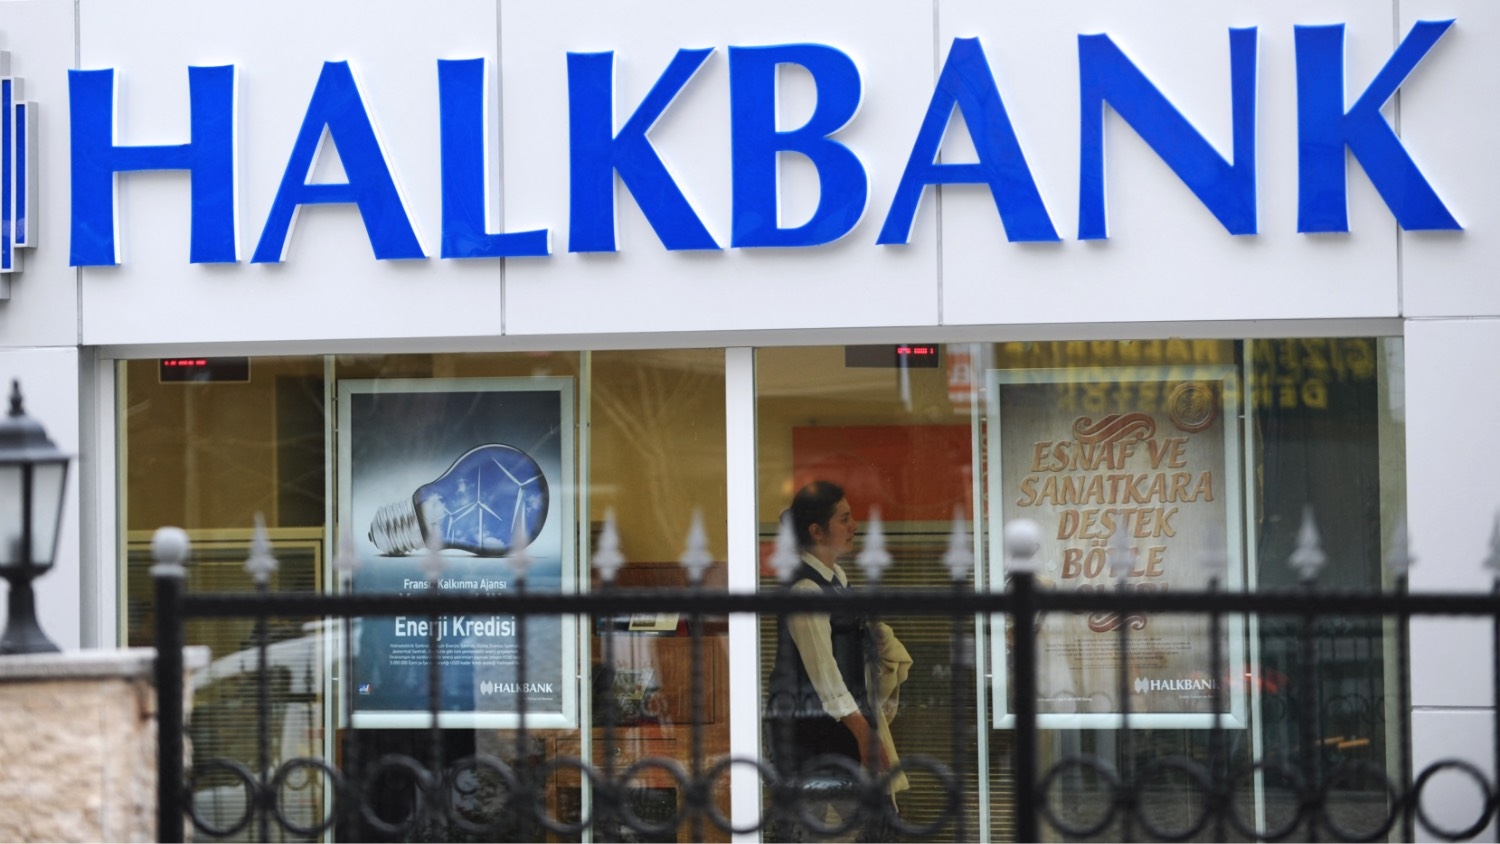 A view of a logo at the entrance of a Halkbank branch on 14 Februrary 2014, in Istanbul.